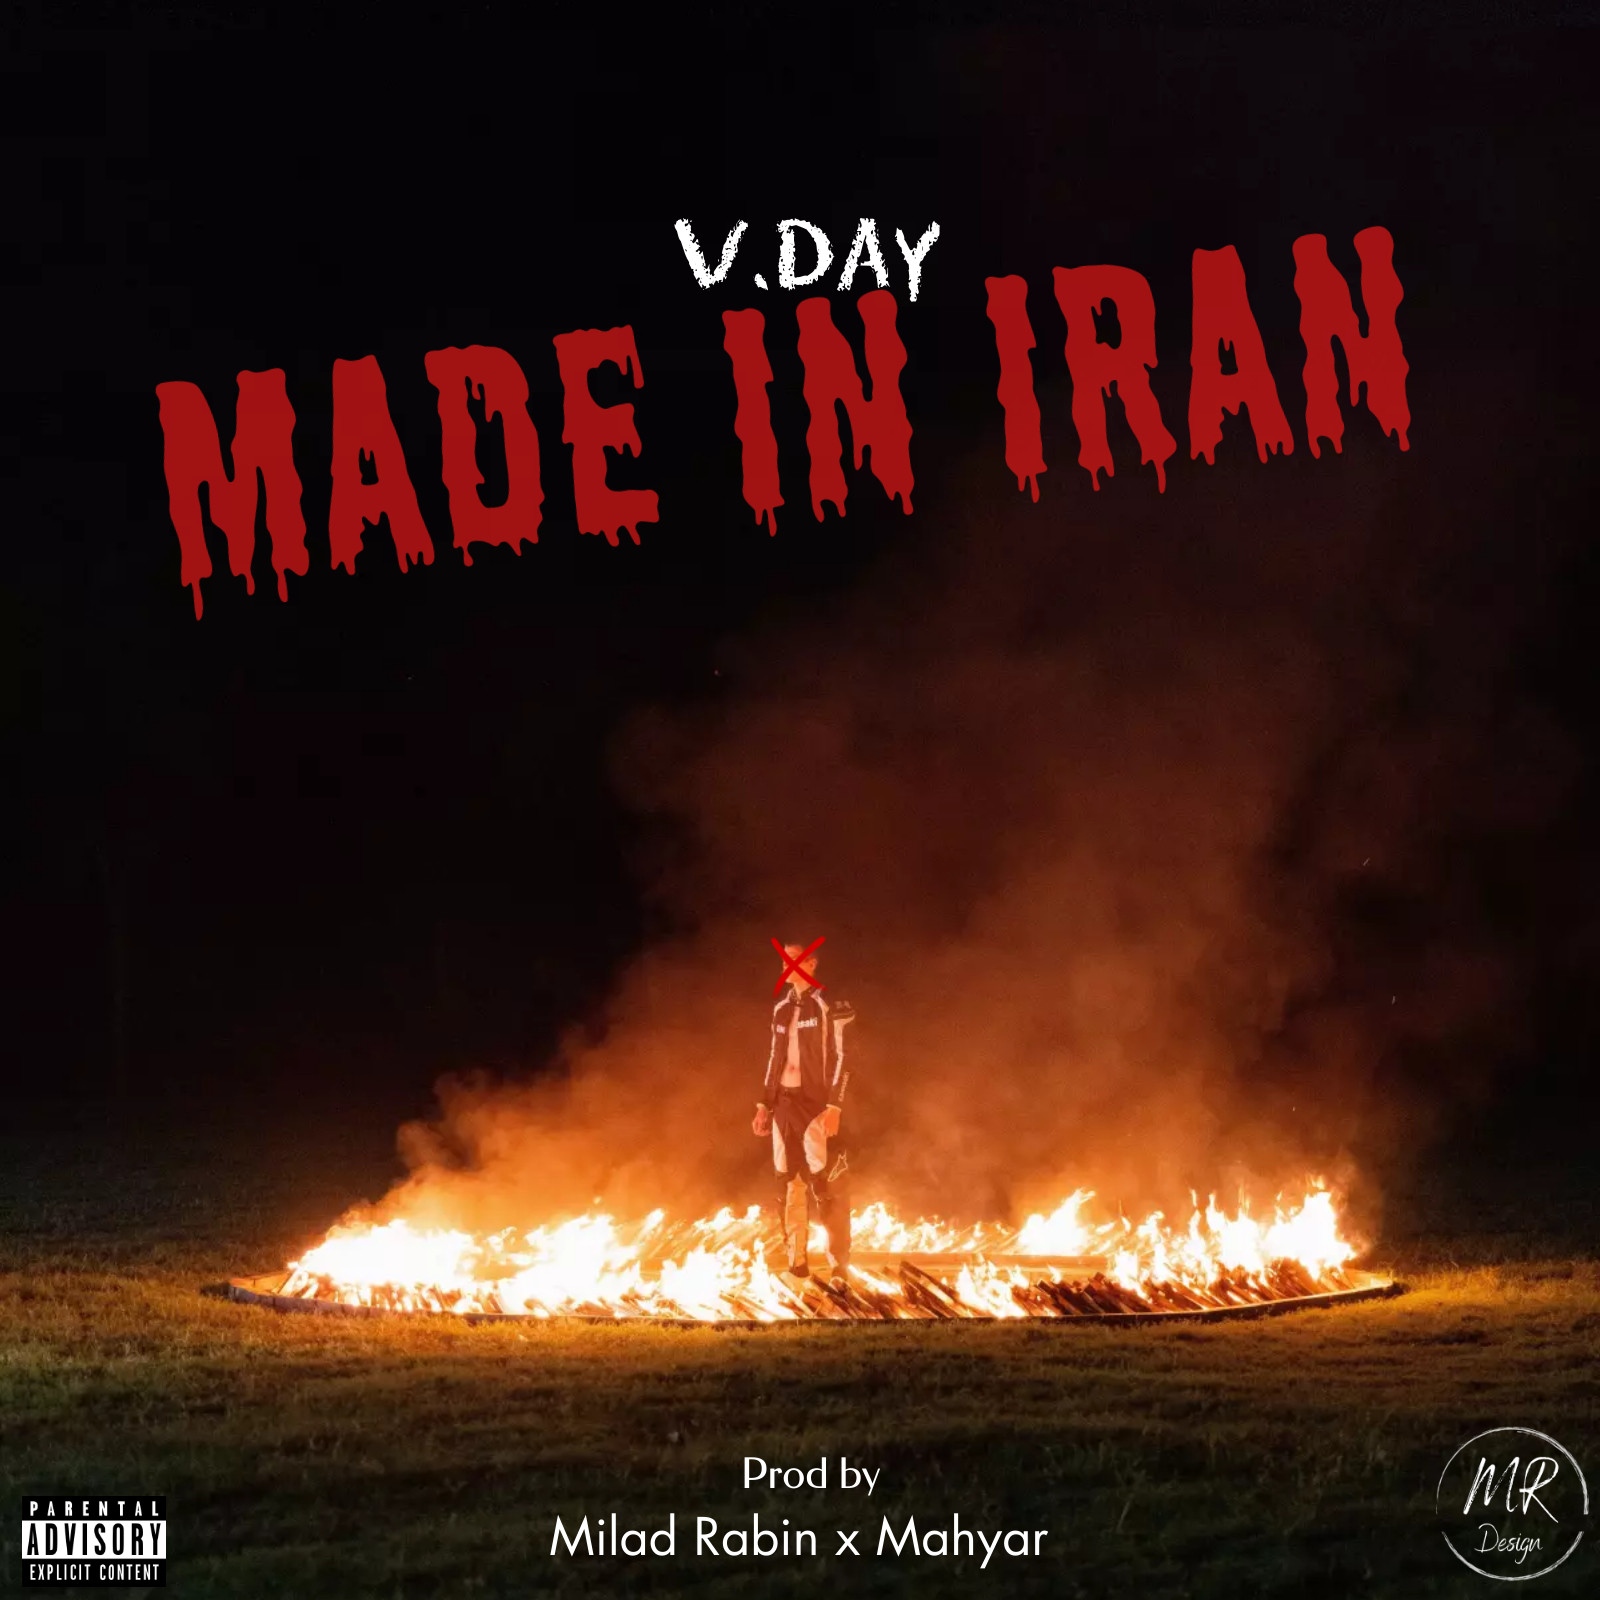 Vday - Made In Iran